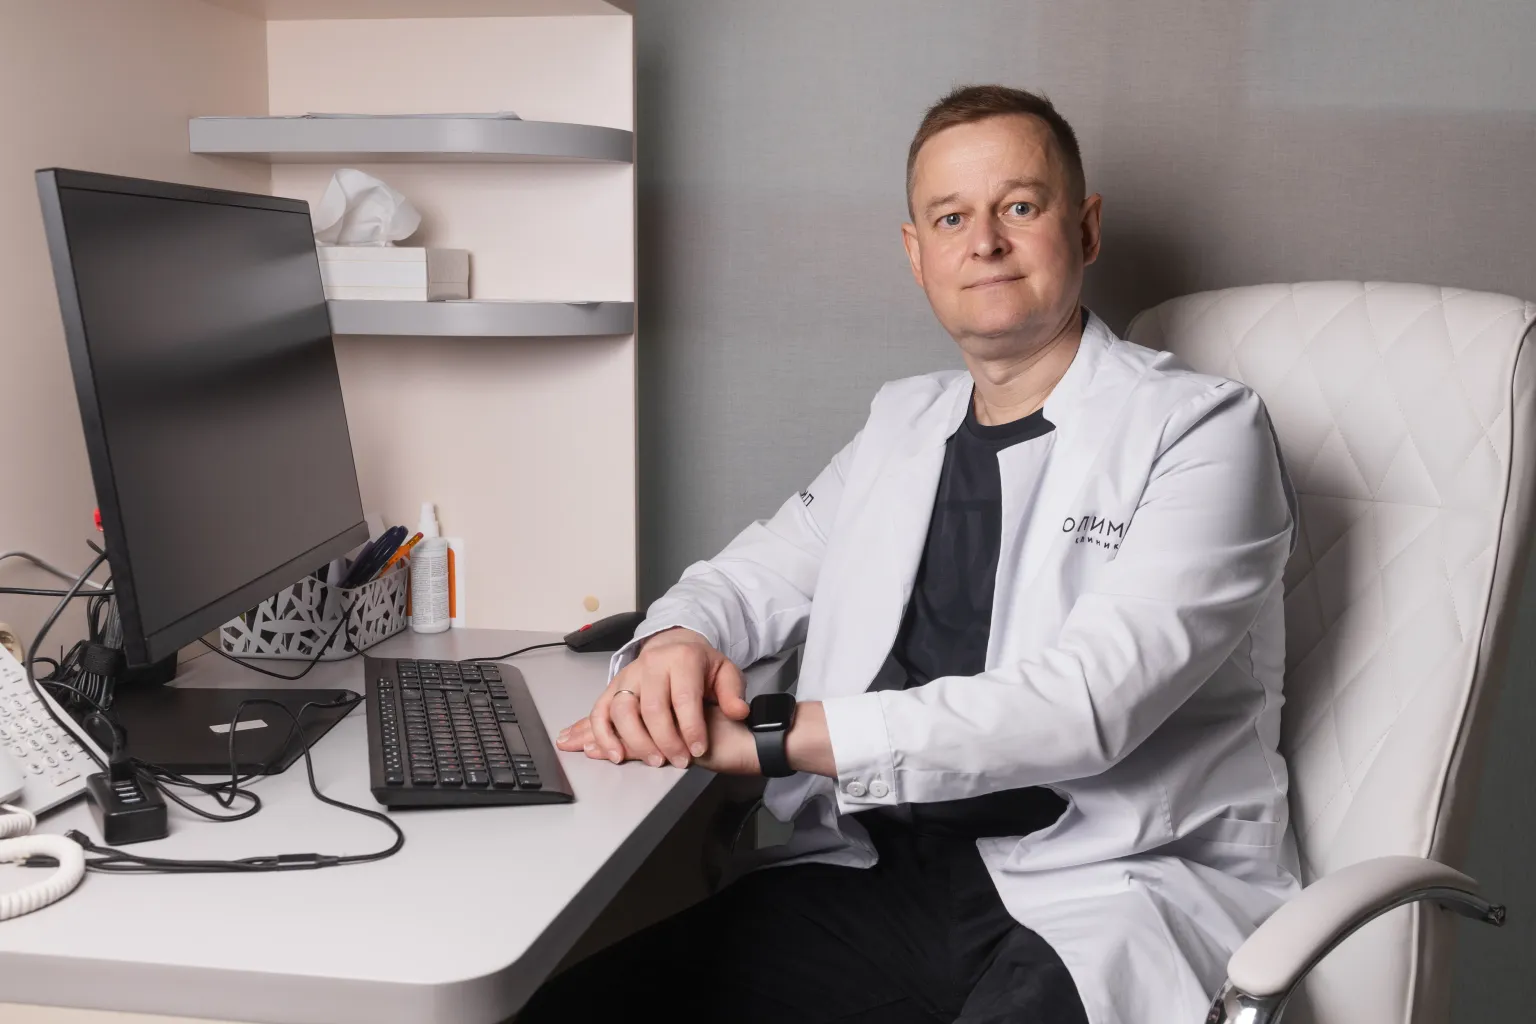 Mikhail Toporov has 20 years of experience as an operating urologist in a hospital